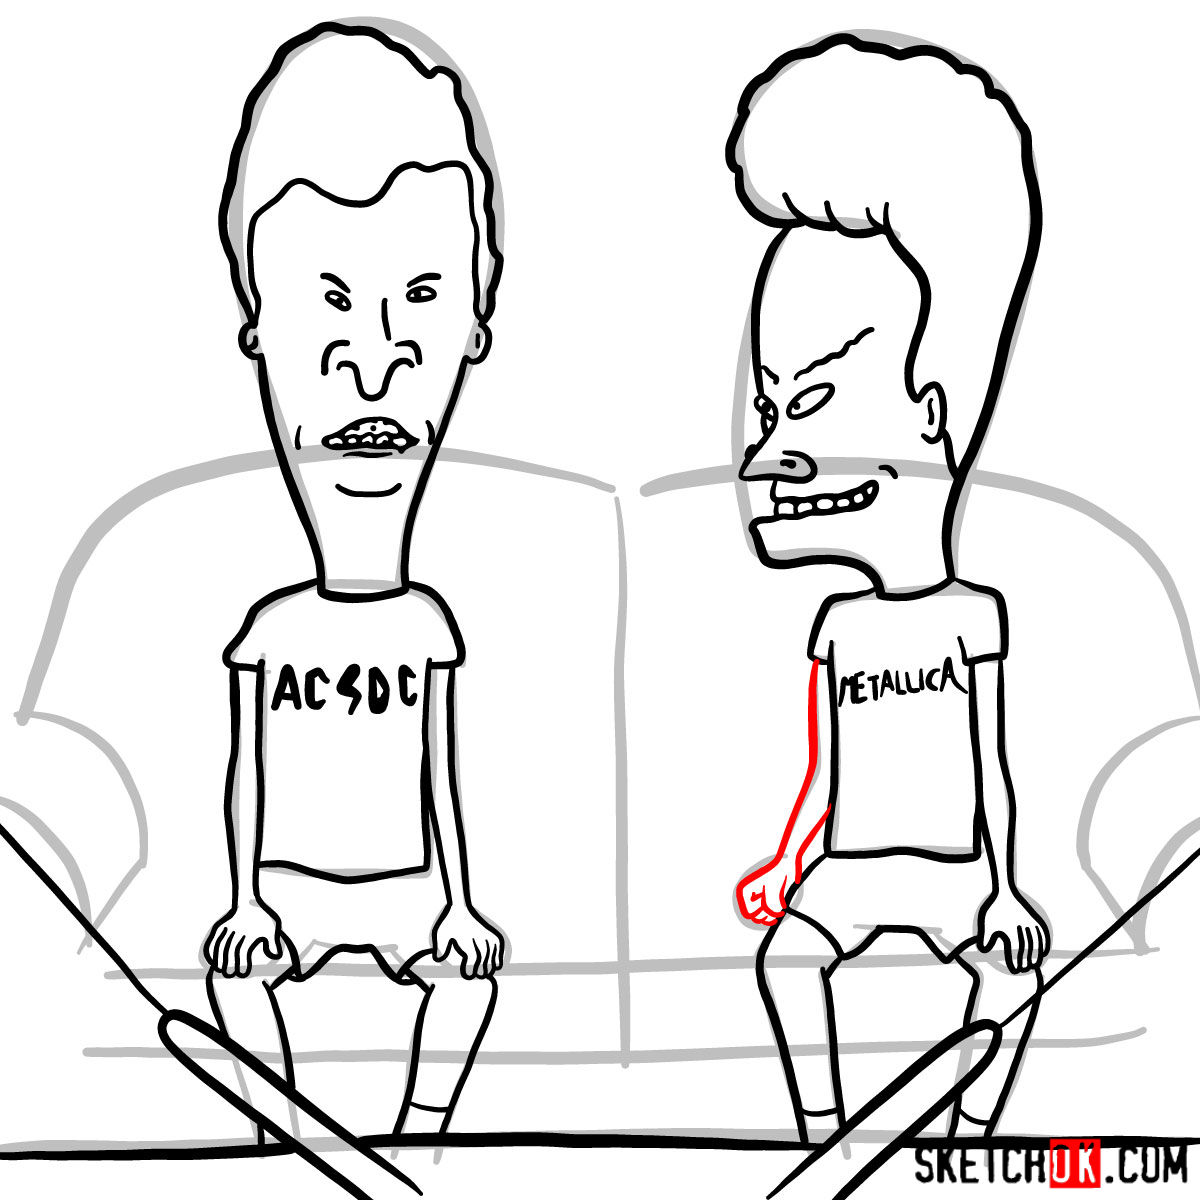 How to draw Beavis and Butt-Head - step 18